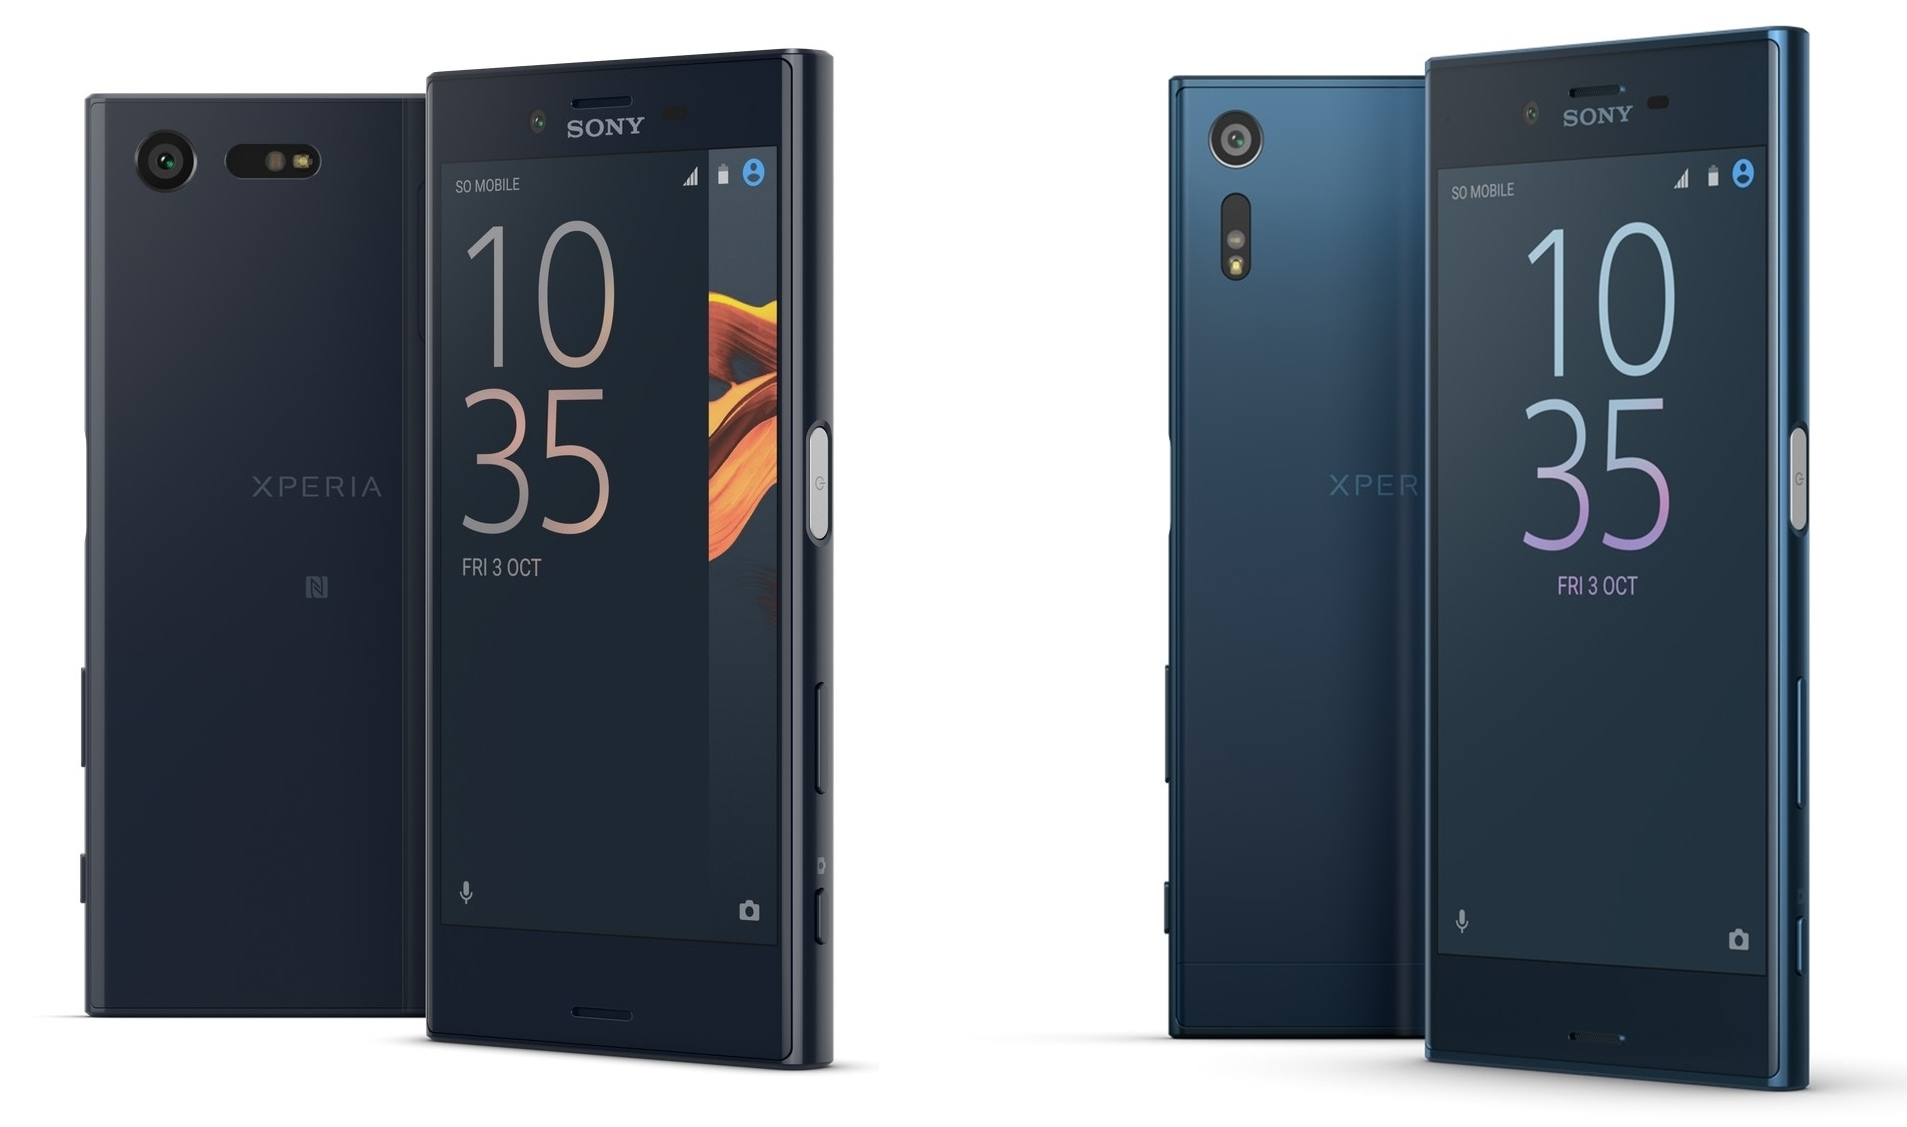 sony-mobile-2016-rumor-two-phones-for-2016